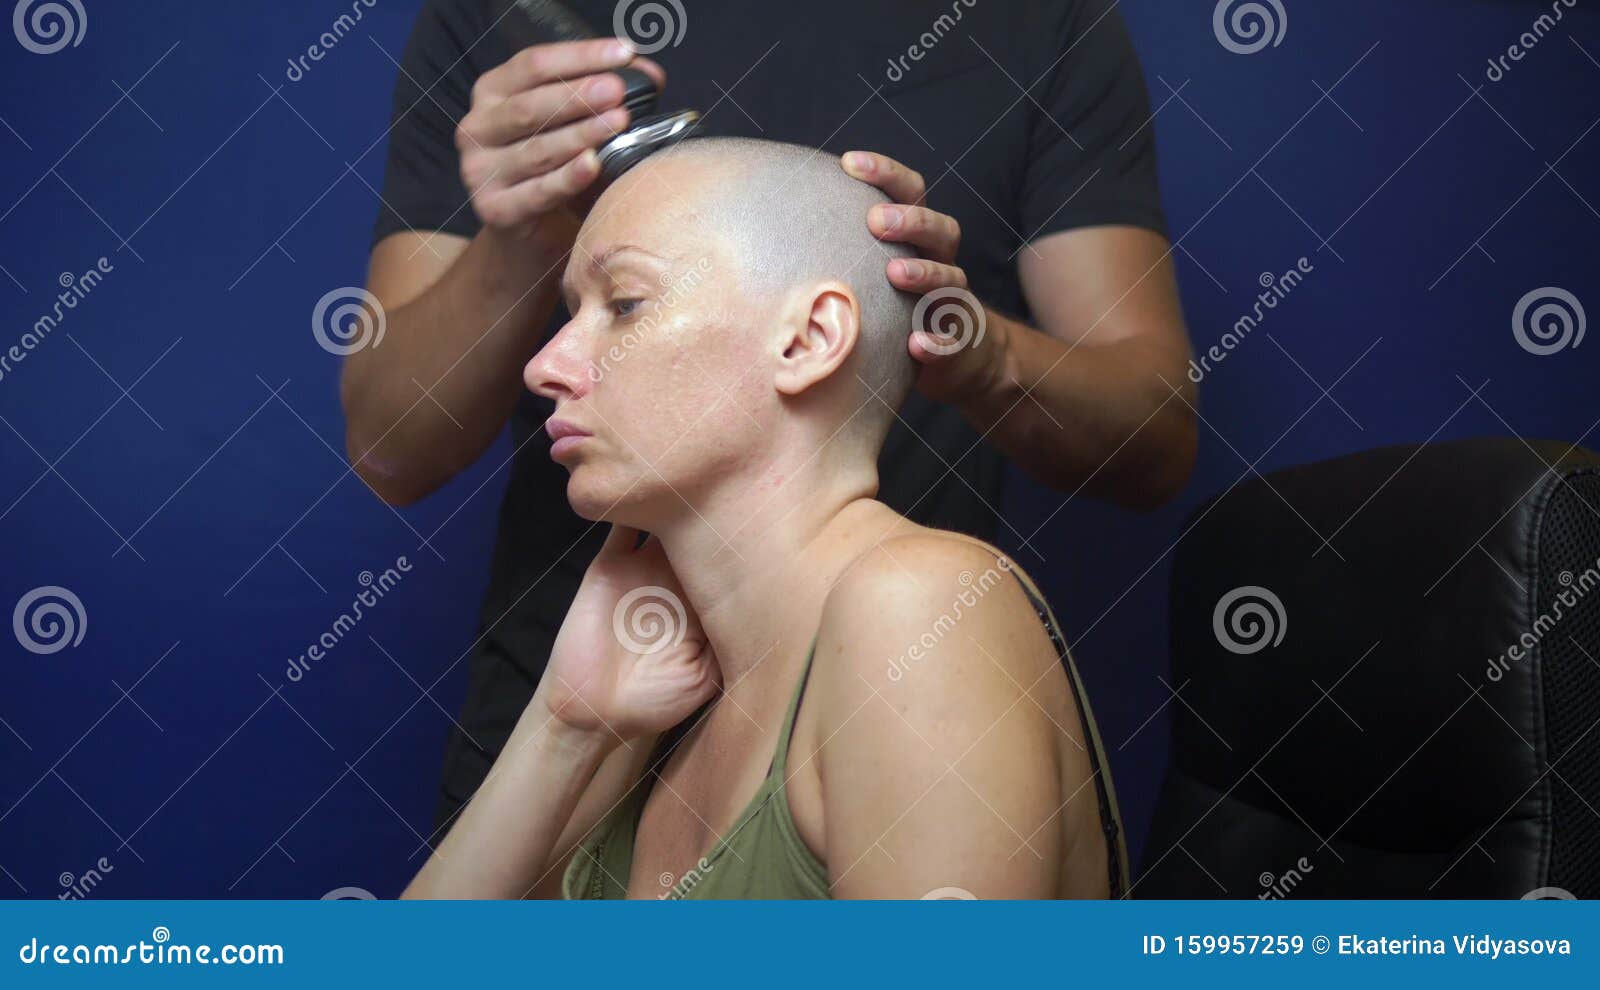 Man Shaves A Bald Woman With An Electric Razor On A Blue Background. 